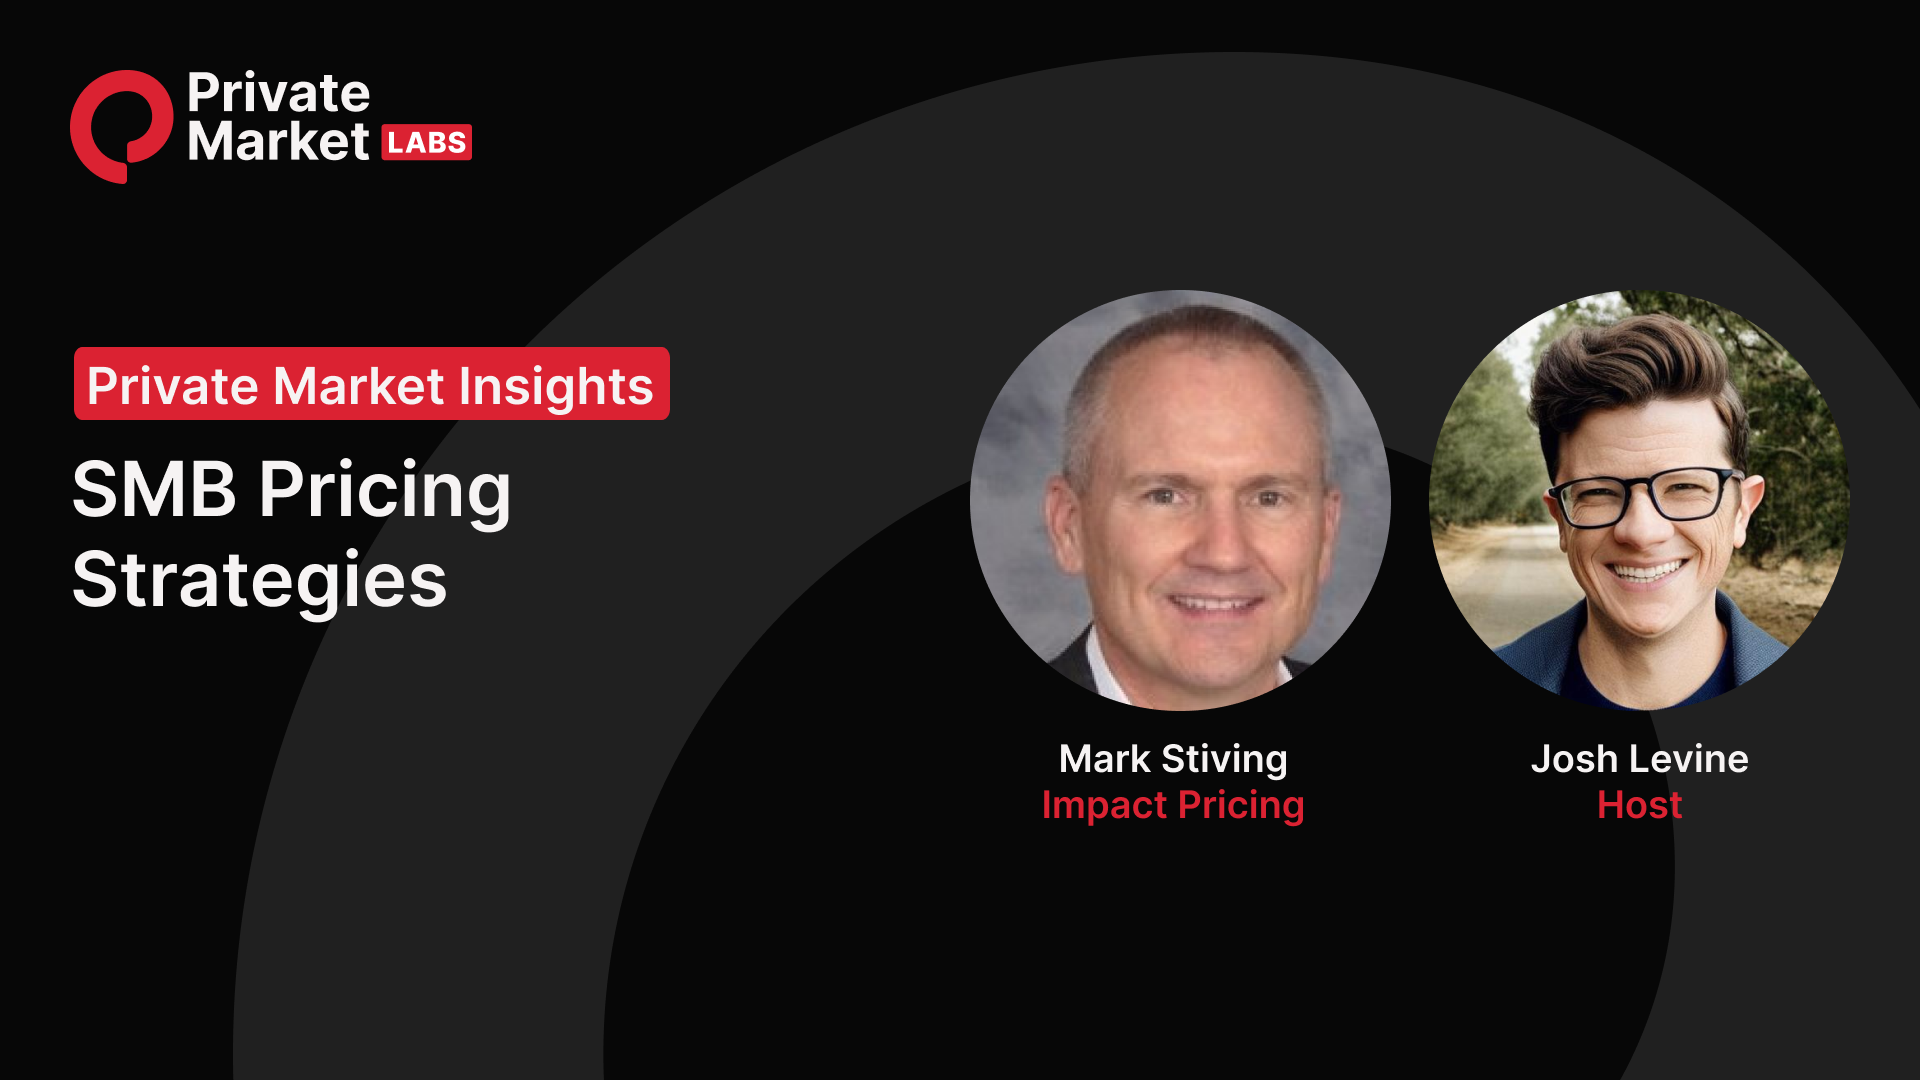 SMB Pricing with Mark Stiving